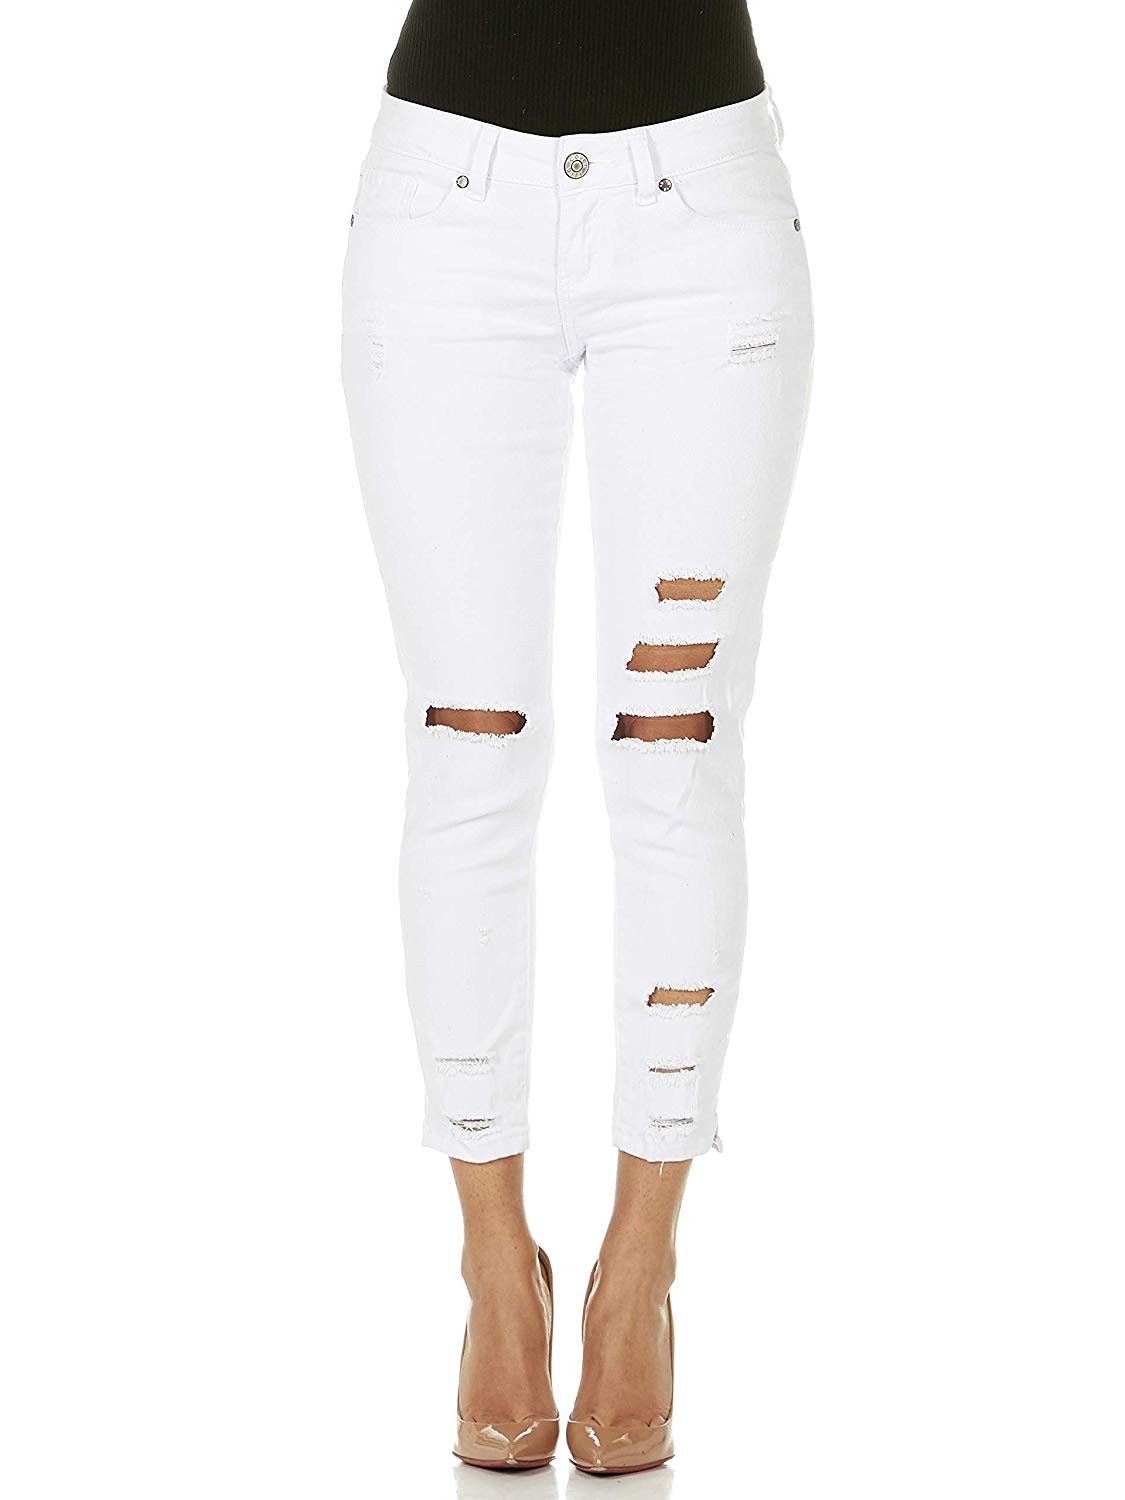 CG JEANS Plus Size Cute Juniors Big Mid Rise Large Ripped Torn Crop Skinny Fit, White Denim 22 - image 1 of 7